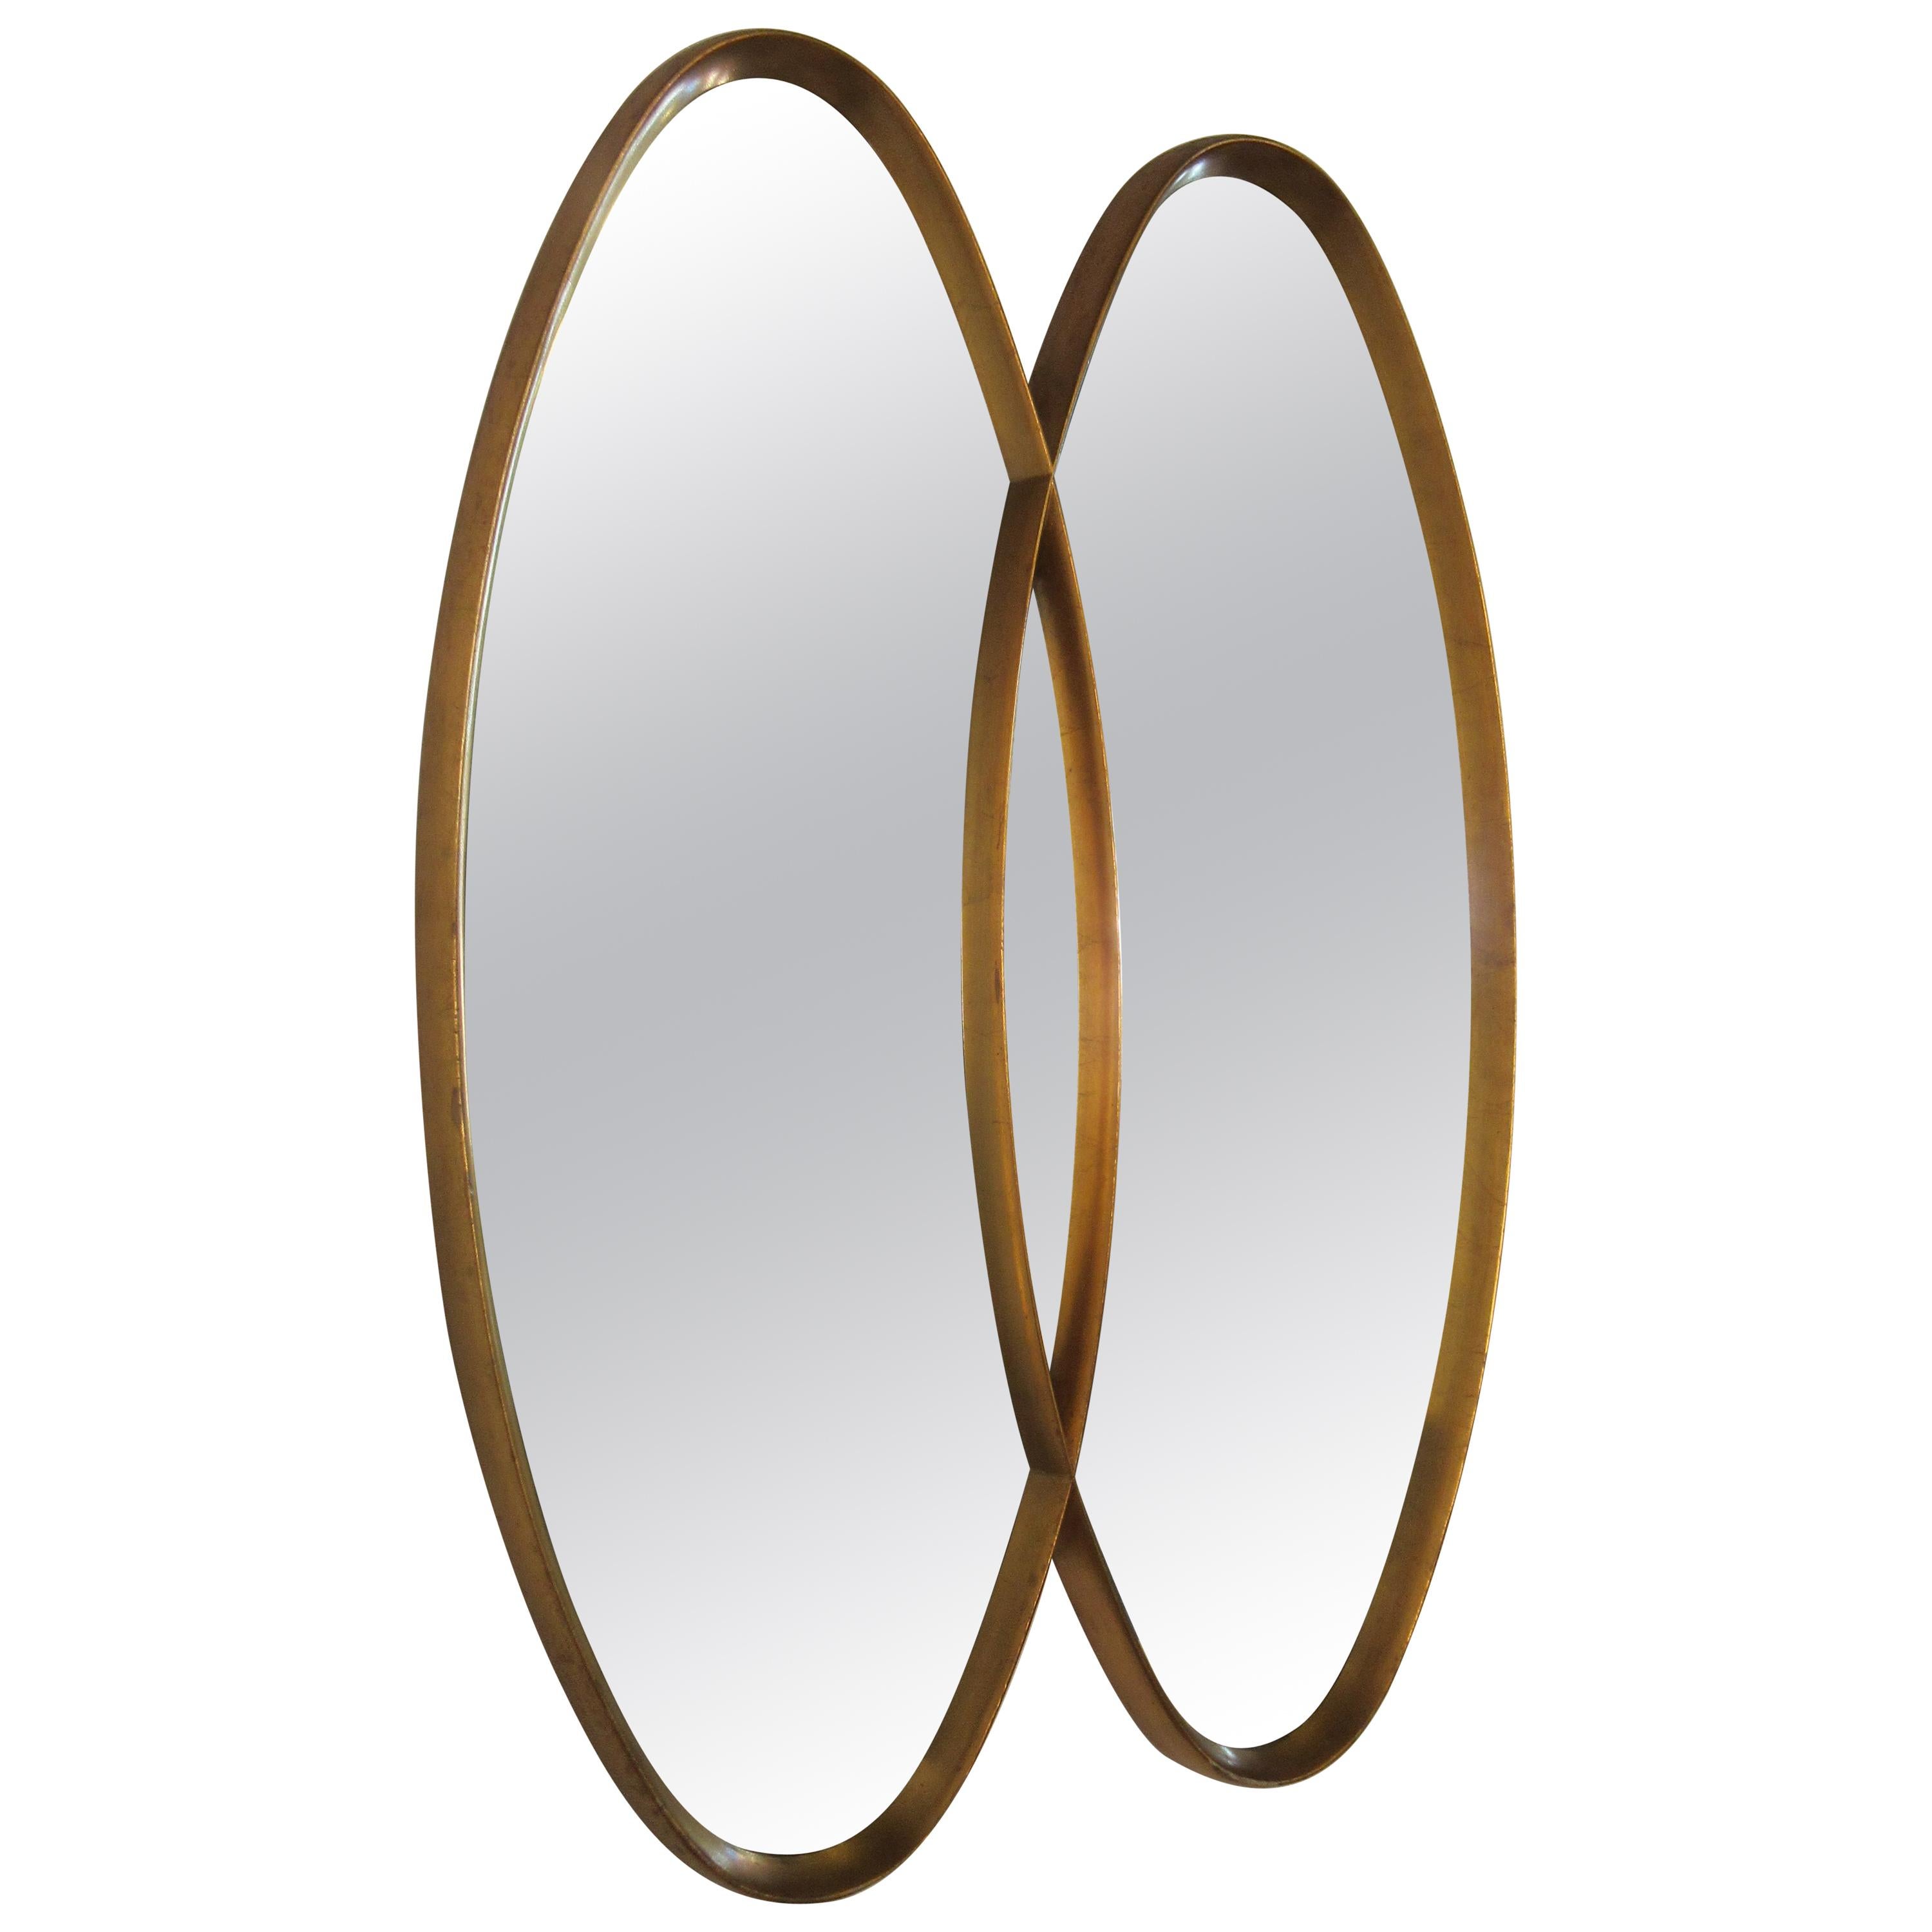 1960s Gilt Oval Intersected Mirror